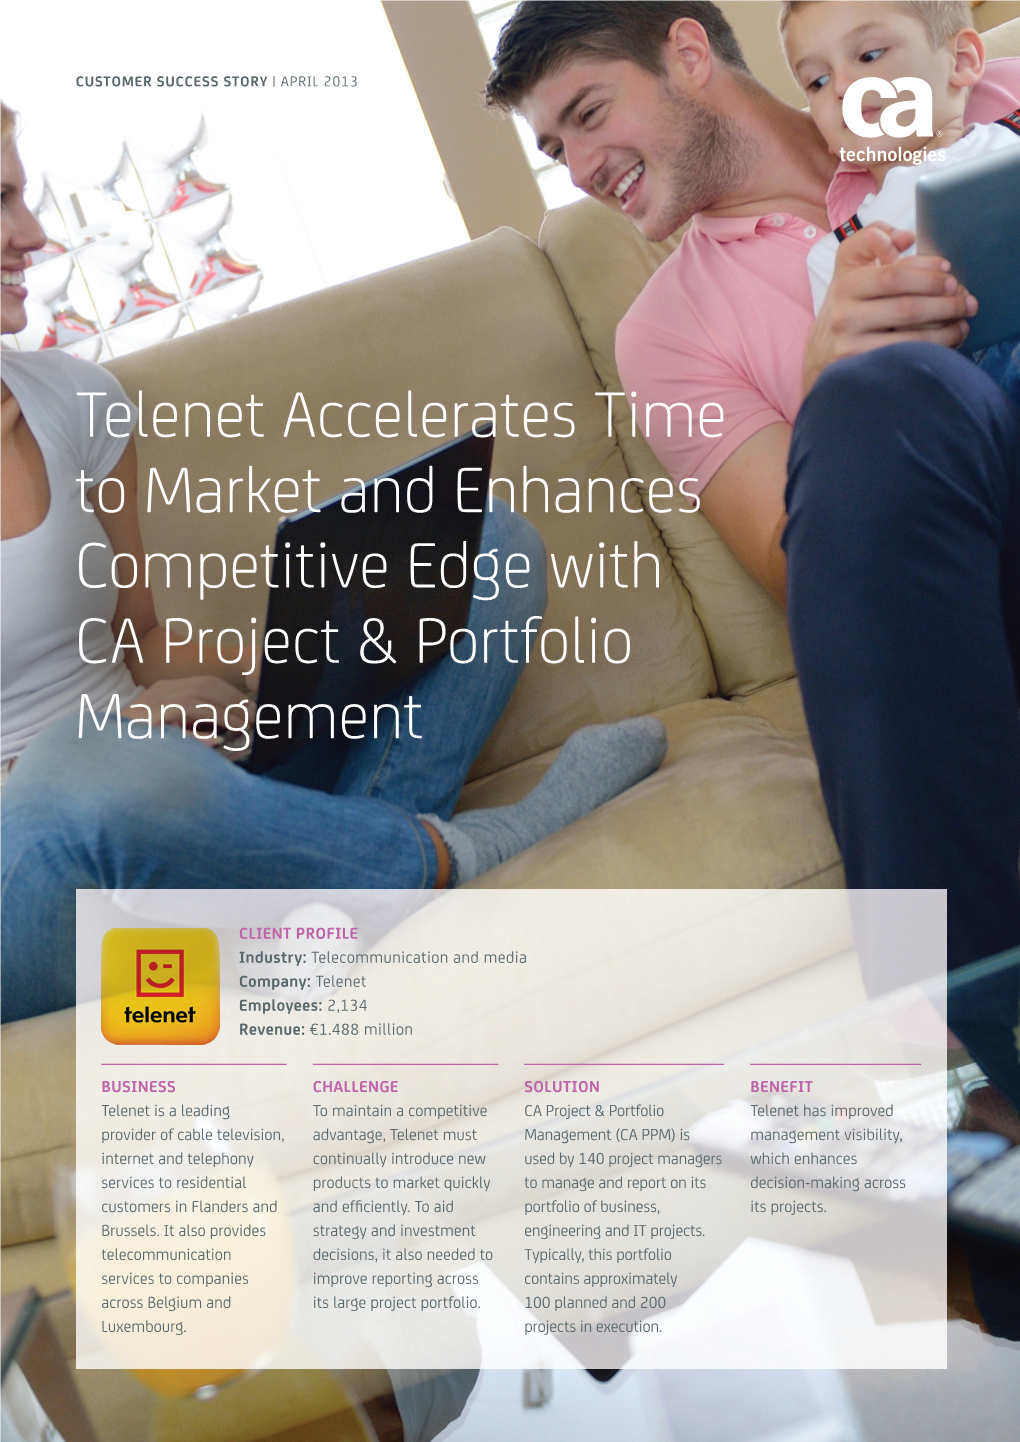 Telenet Accelerates Time to Market and Enhances Competitive Edge with CA Project & Portfolio Management